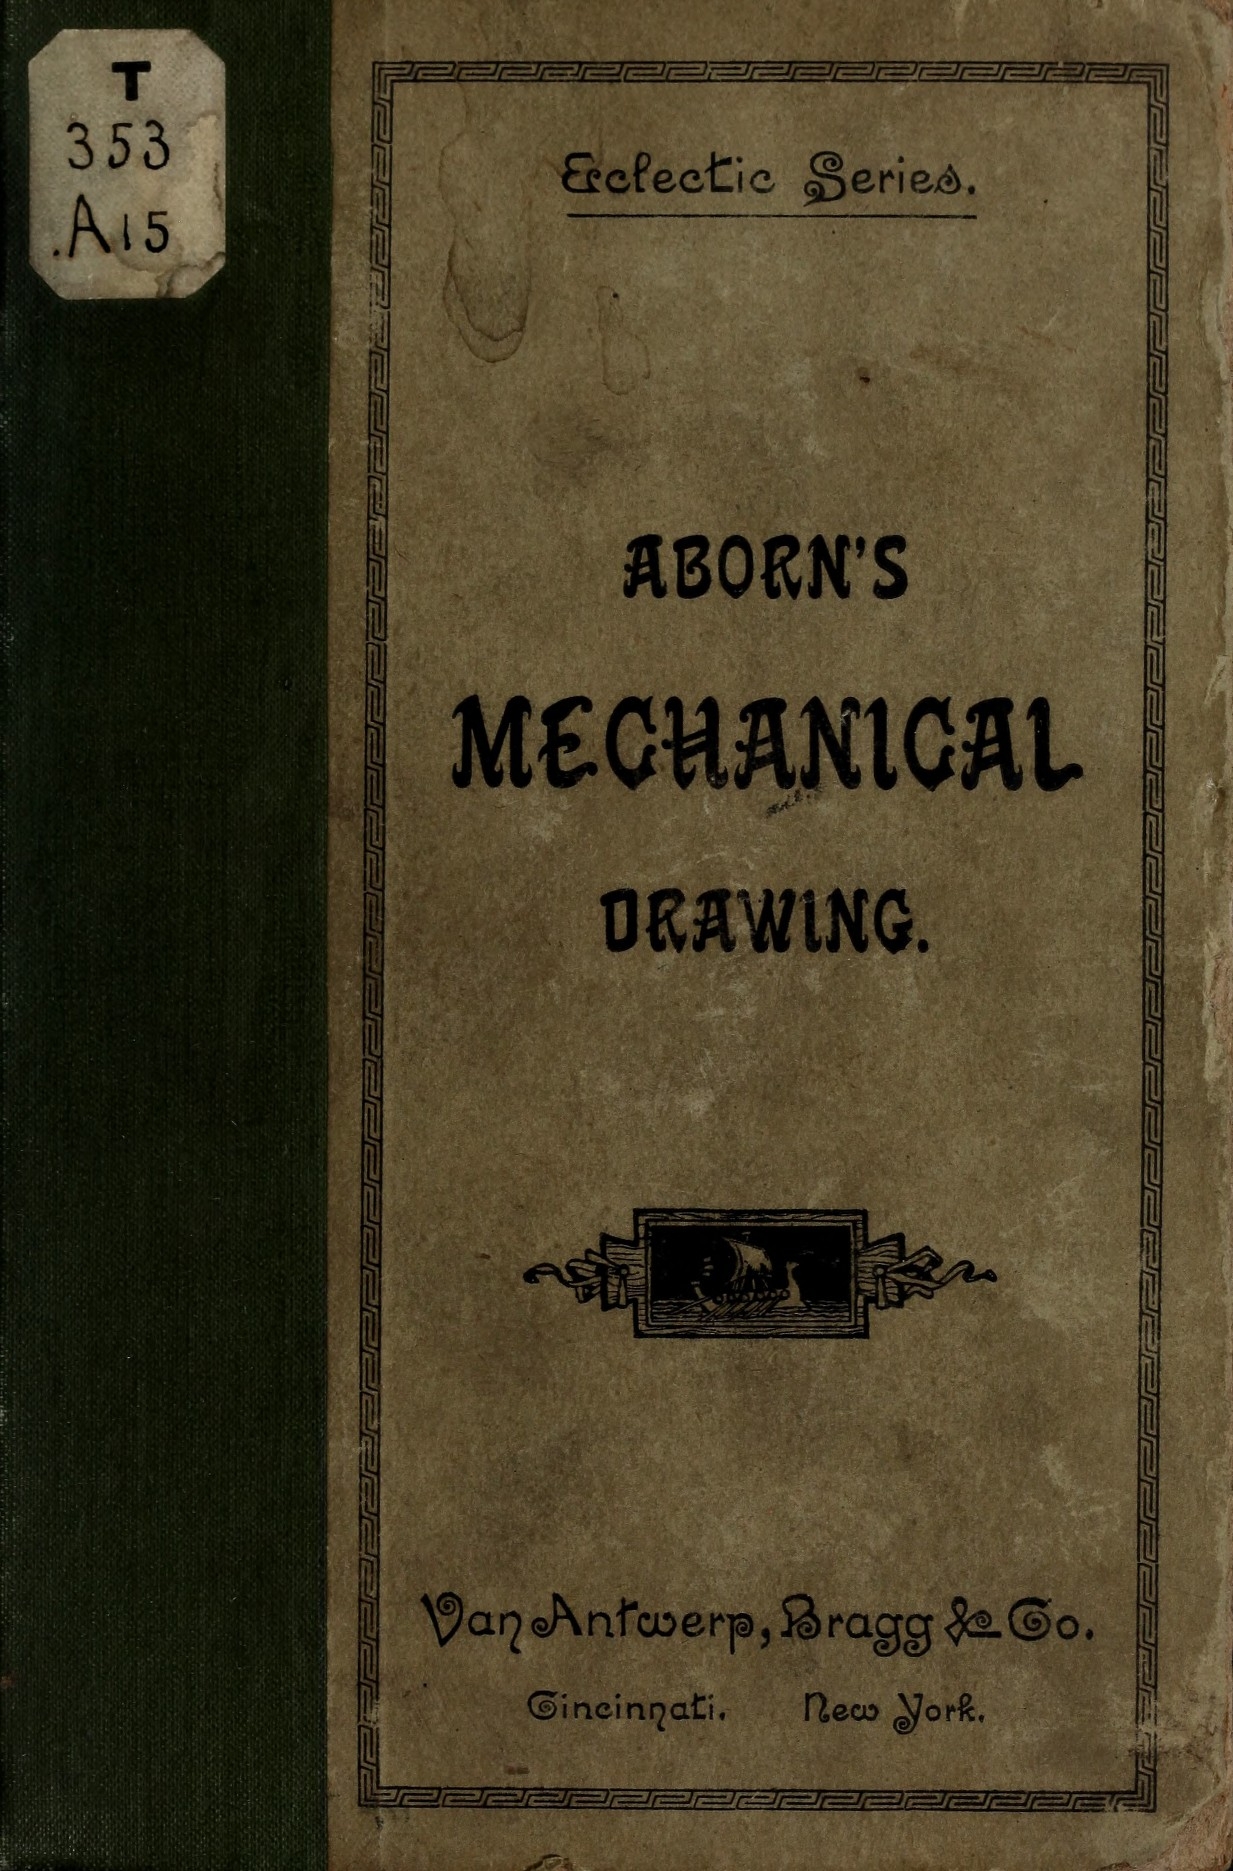 [Frank Aborn] Elementary mechanical drawing, for school and shop [English] 1